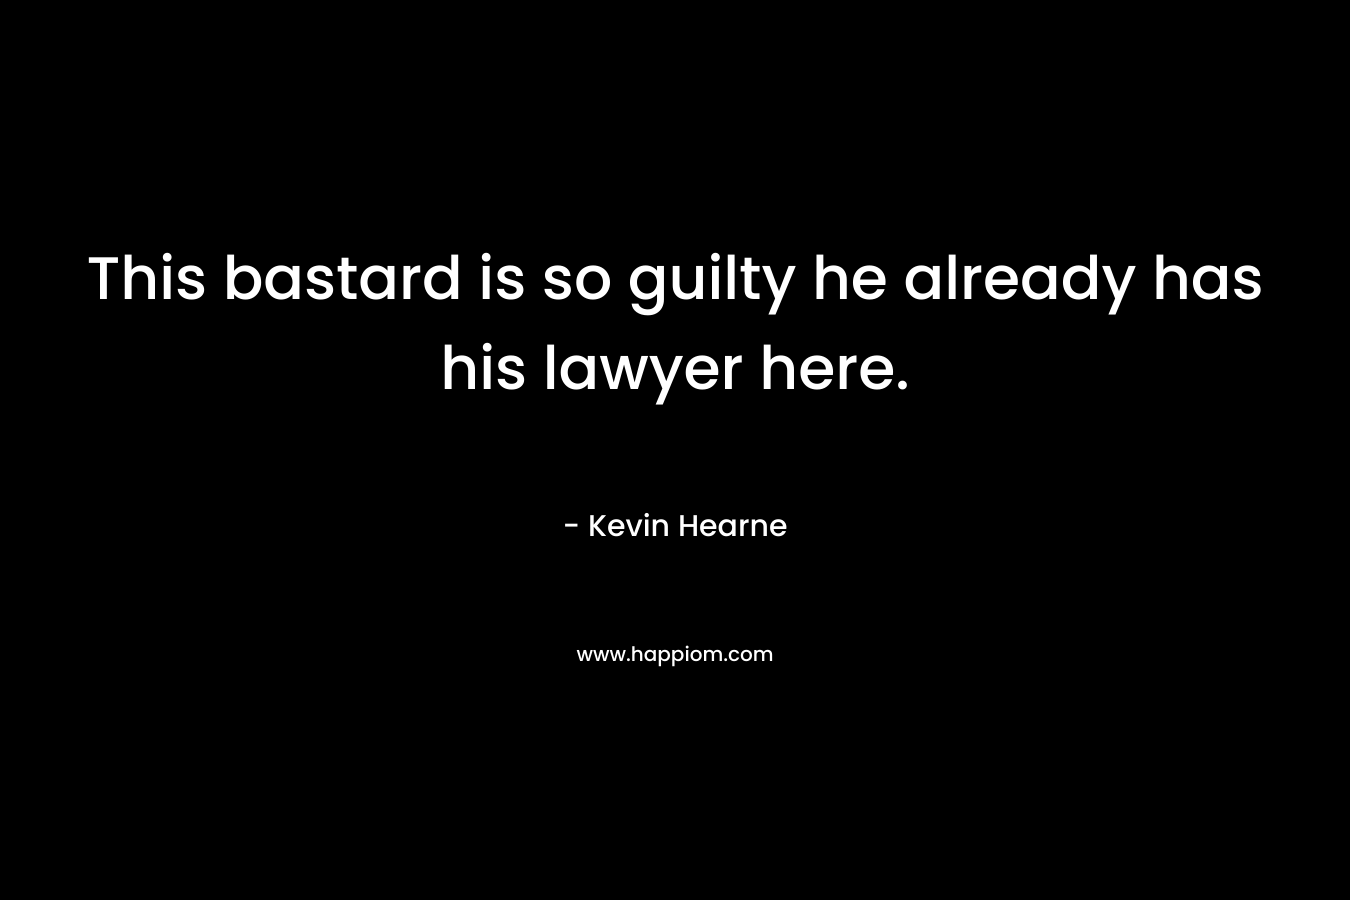 This bastard is so guilty he already has his lawyer here. – Kevin Hearne